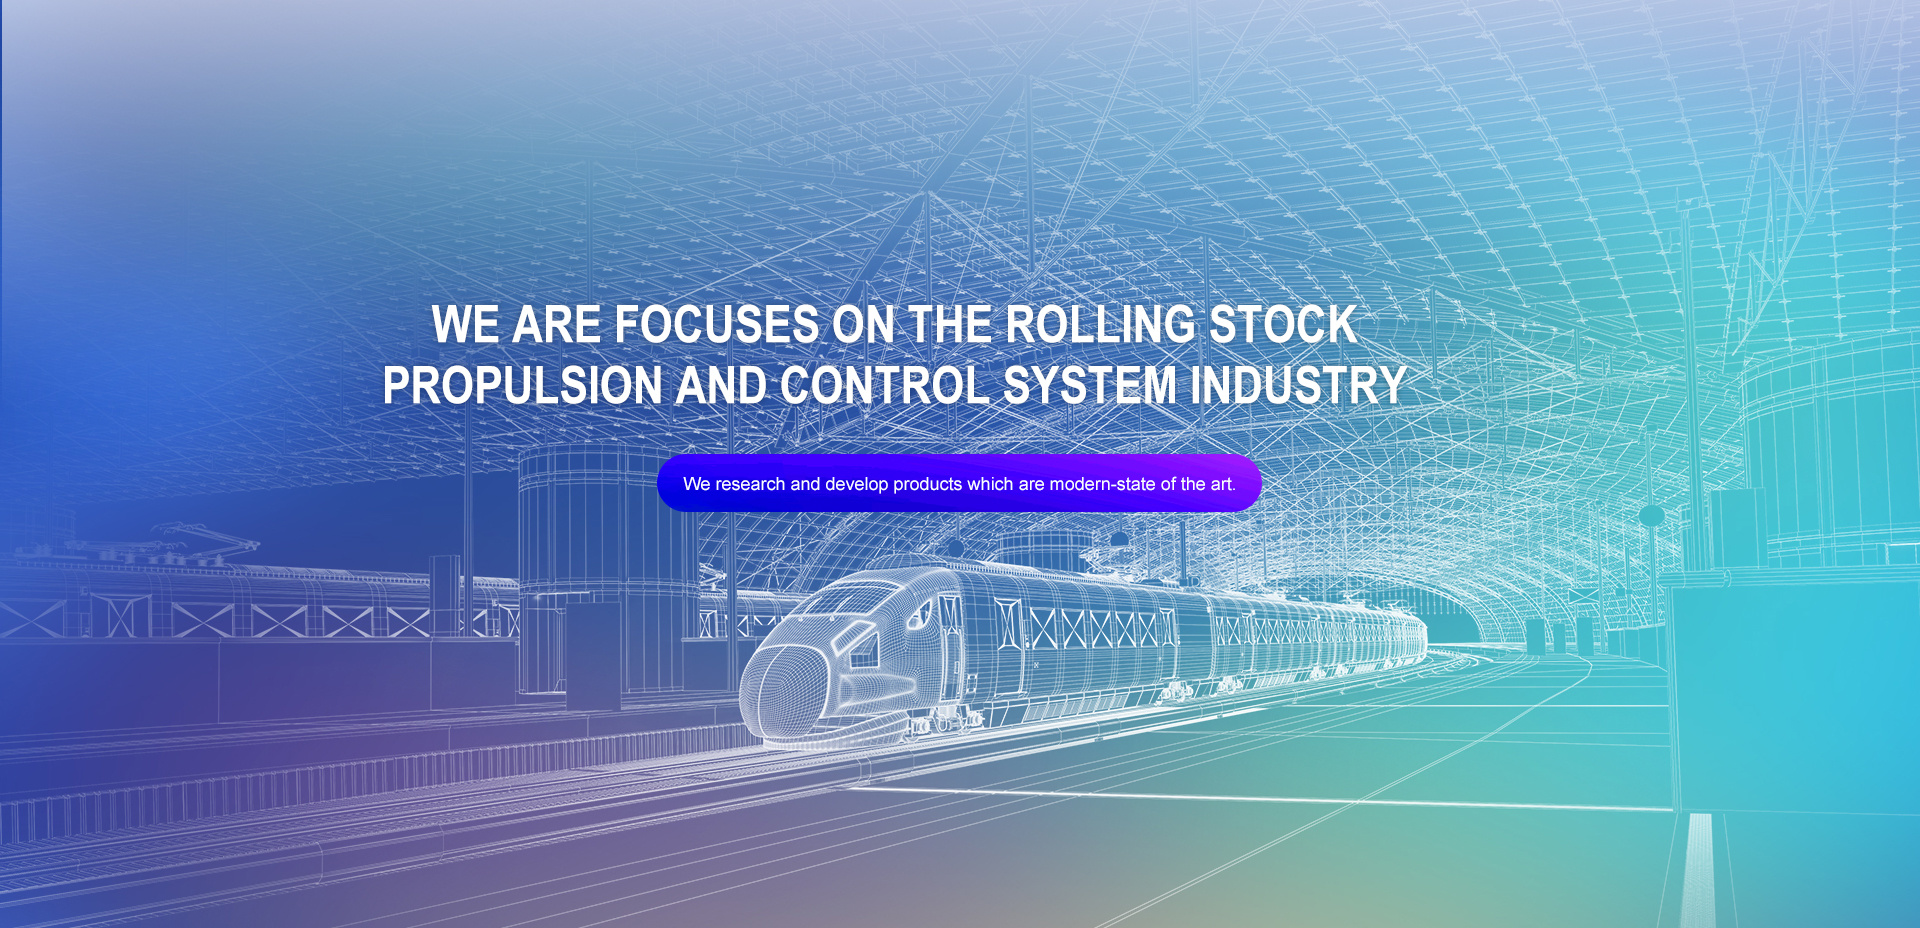 Focusing on the research and development and manufacturing of traction and network control systems